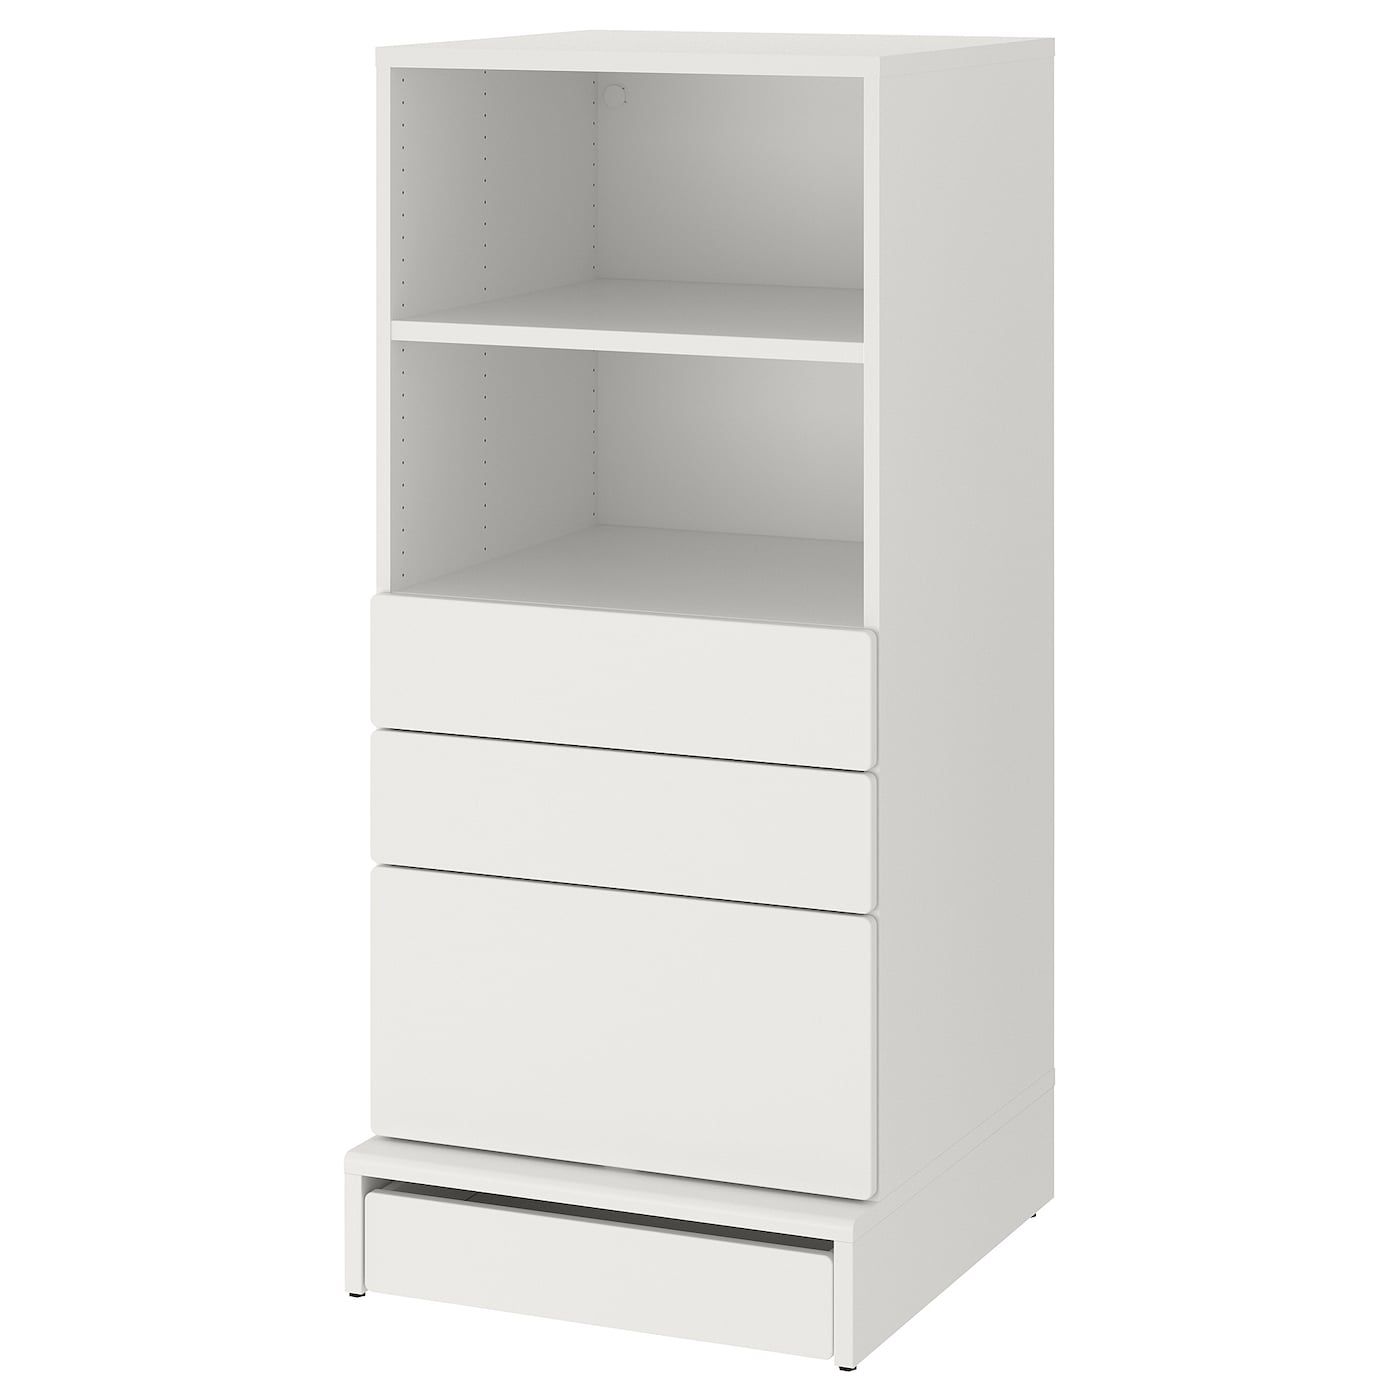 Småstad / Uppföra Bookcase, White White/with 3 Drawers, 235/8x243/4x531/2"  – Ikea For Two Drawer Bookcases (View 10 of 15)